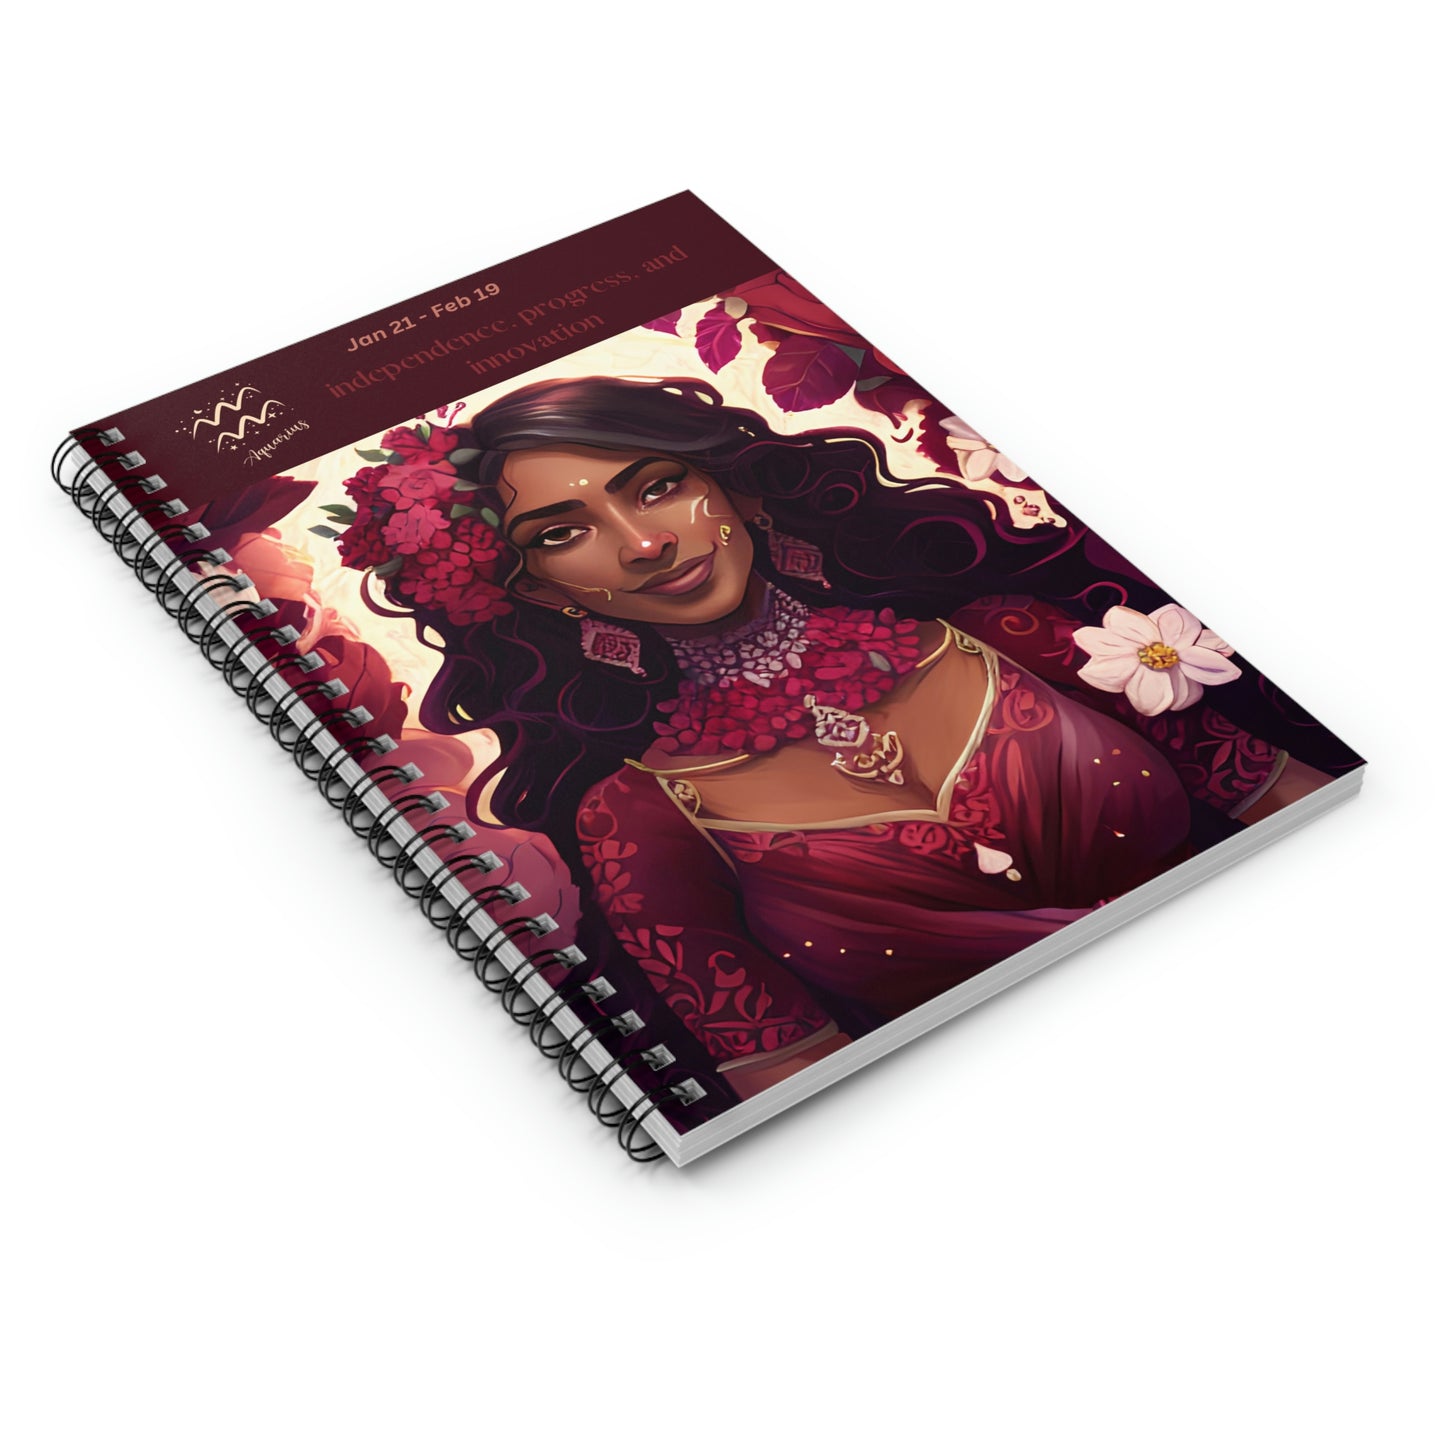 Astrology Collection (Aquarius) - Middle Eastern and Indian Culture Journal - Ruled Line